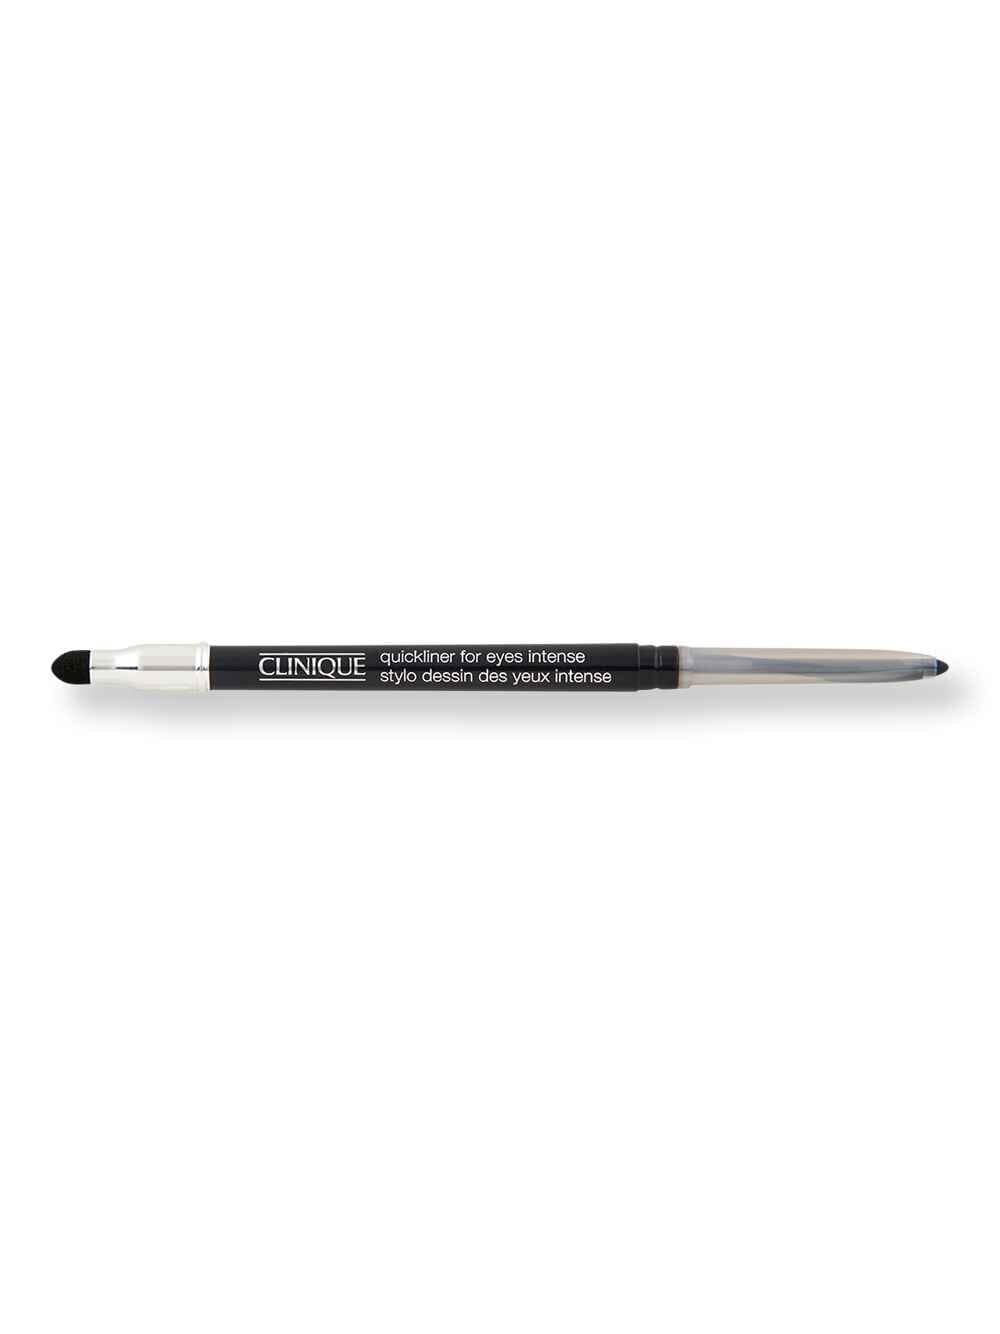 Clinique Clinique Quickliner for Eyes Intense 0.28 gIntense Black Eyeliners 